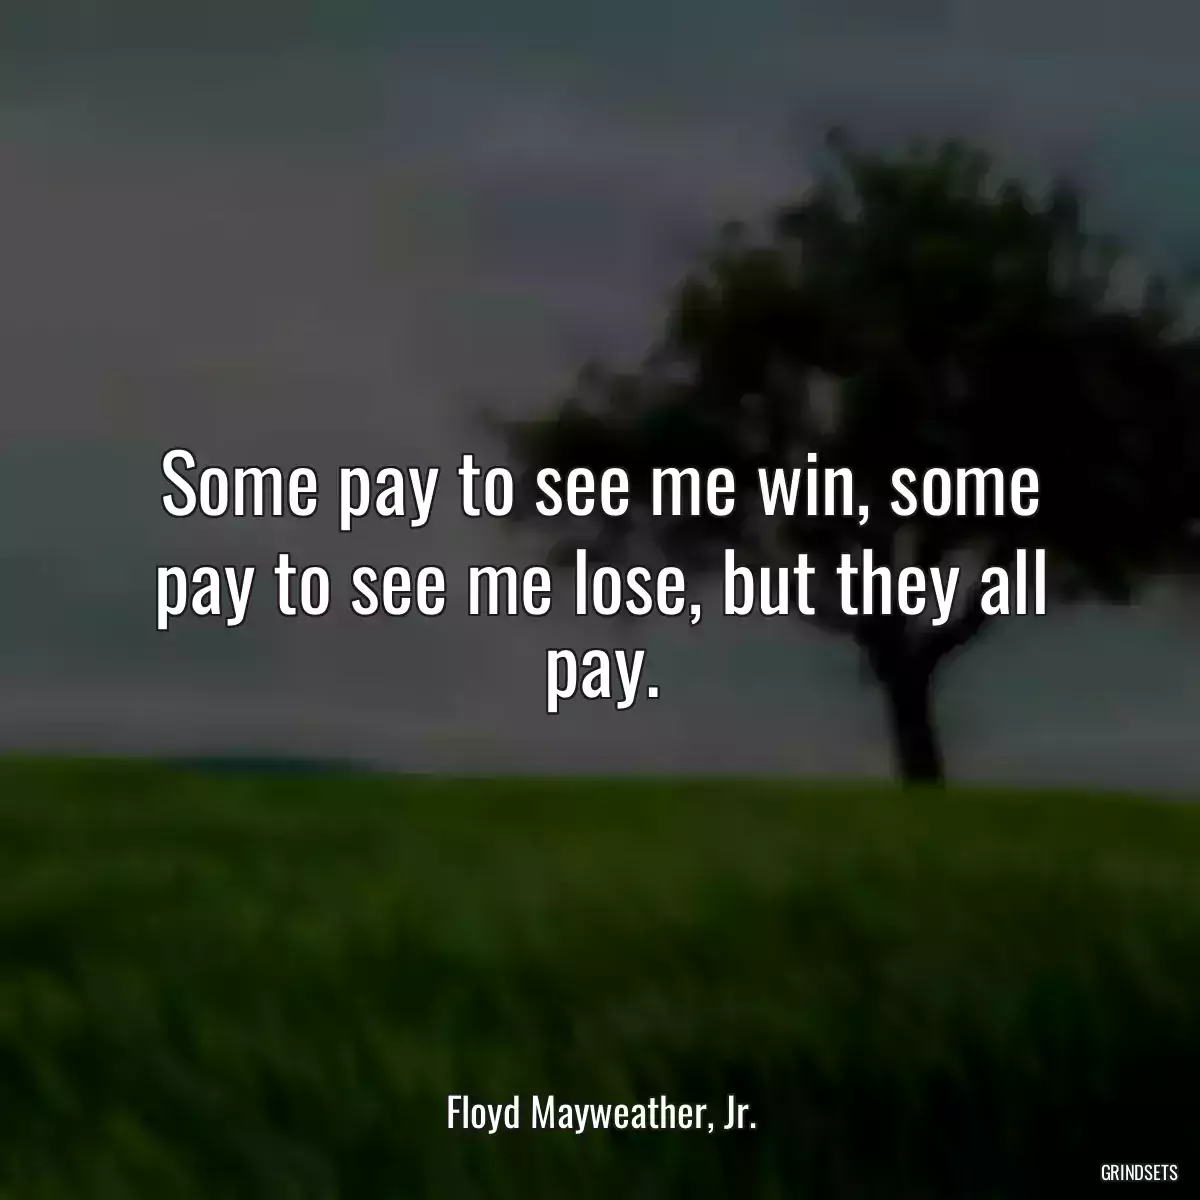 Some pay to see me win, some pay to see me lose, but they all pay.